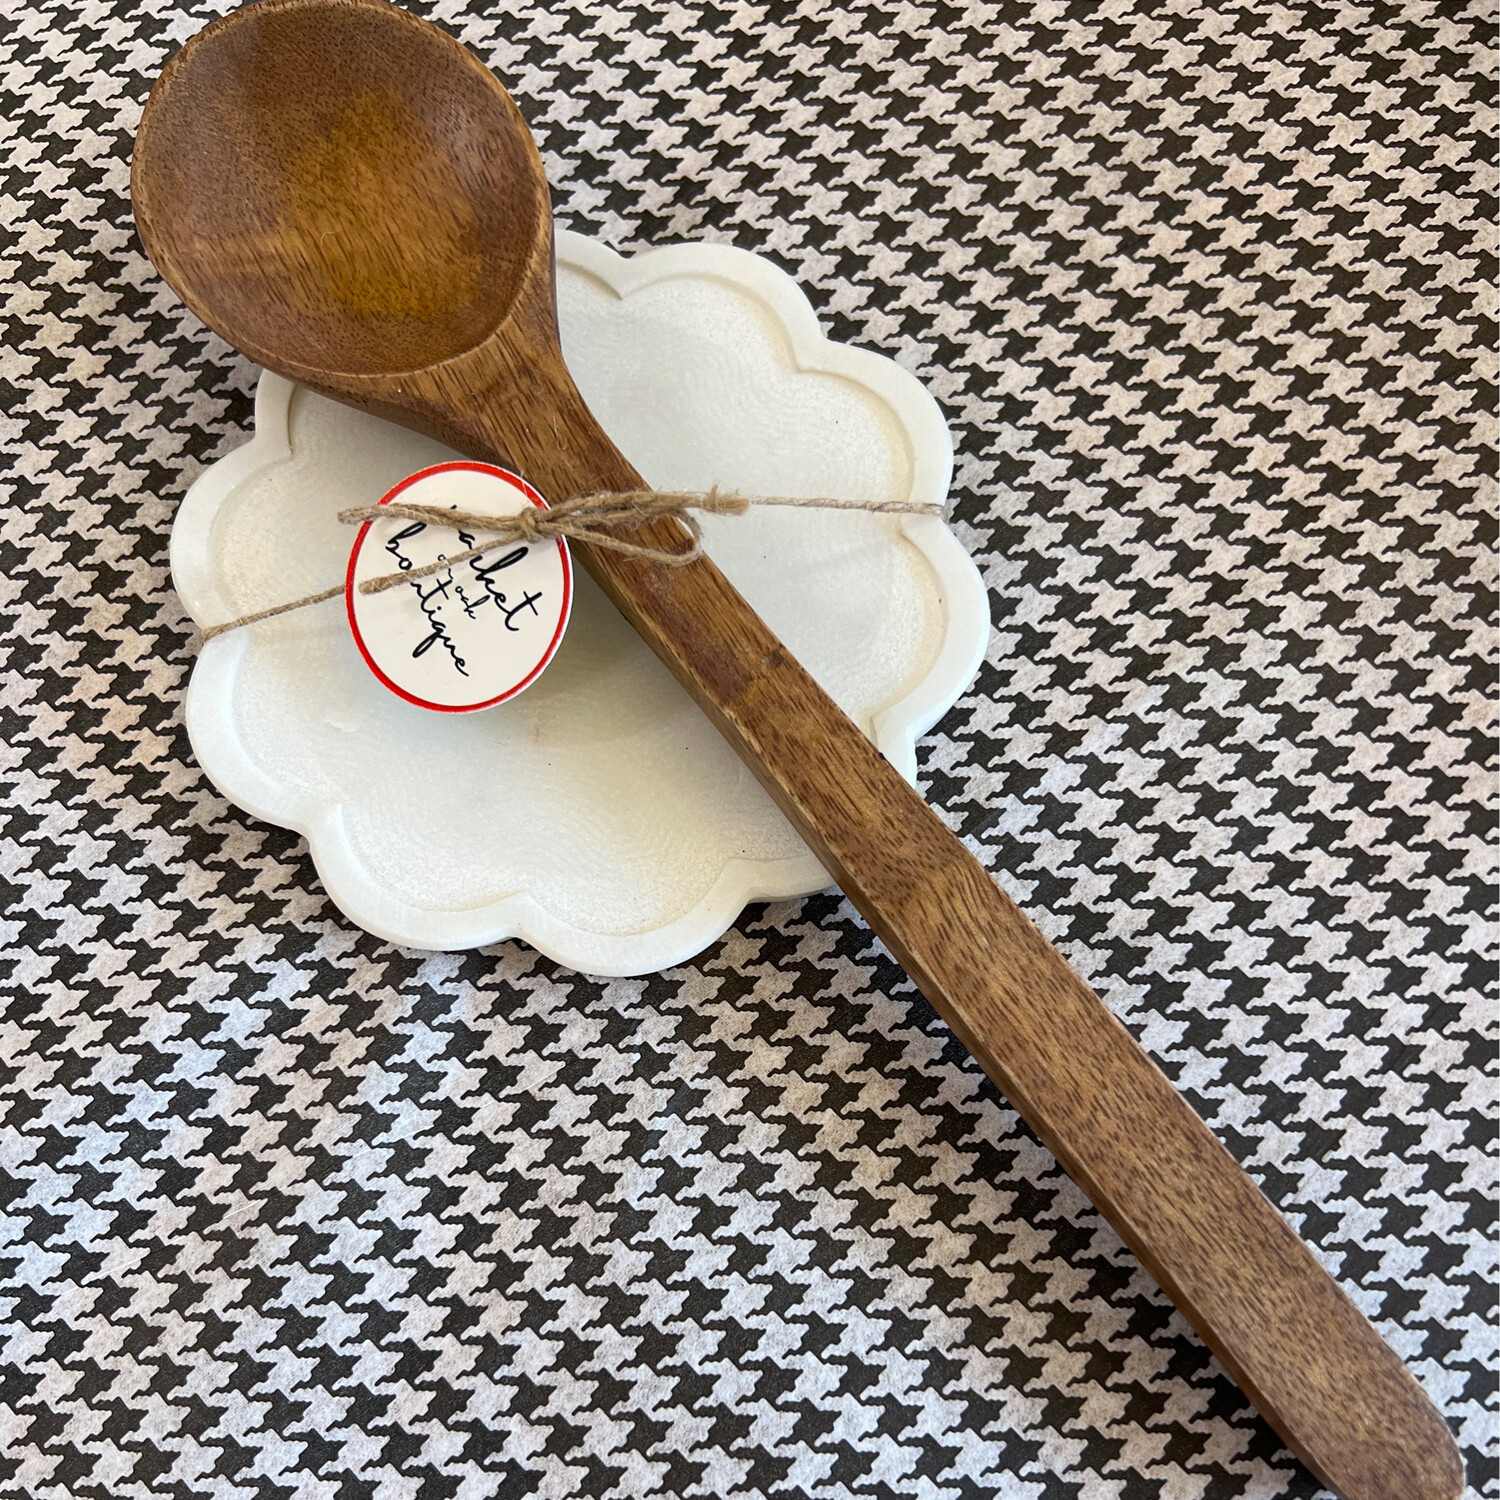 Scalloped Marble Rest & Wood Spoon Set